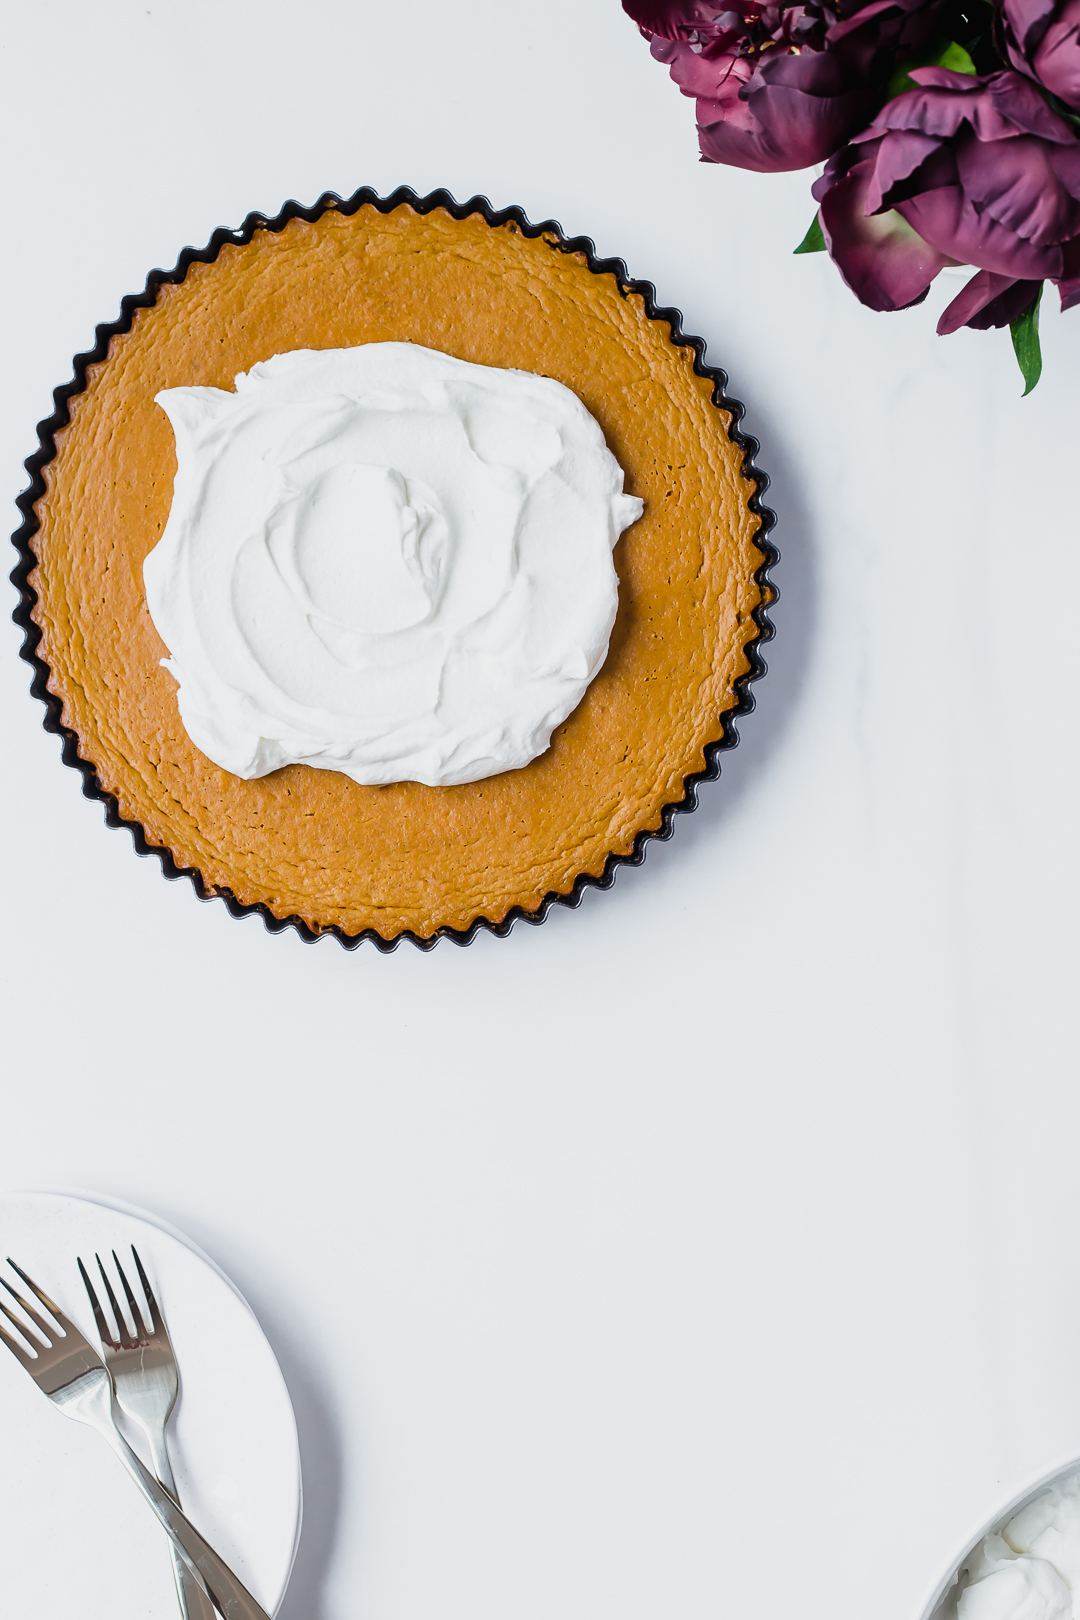 Overhead shot of Pumpkin Pie with chocolate cookie crust topped with whipped cream